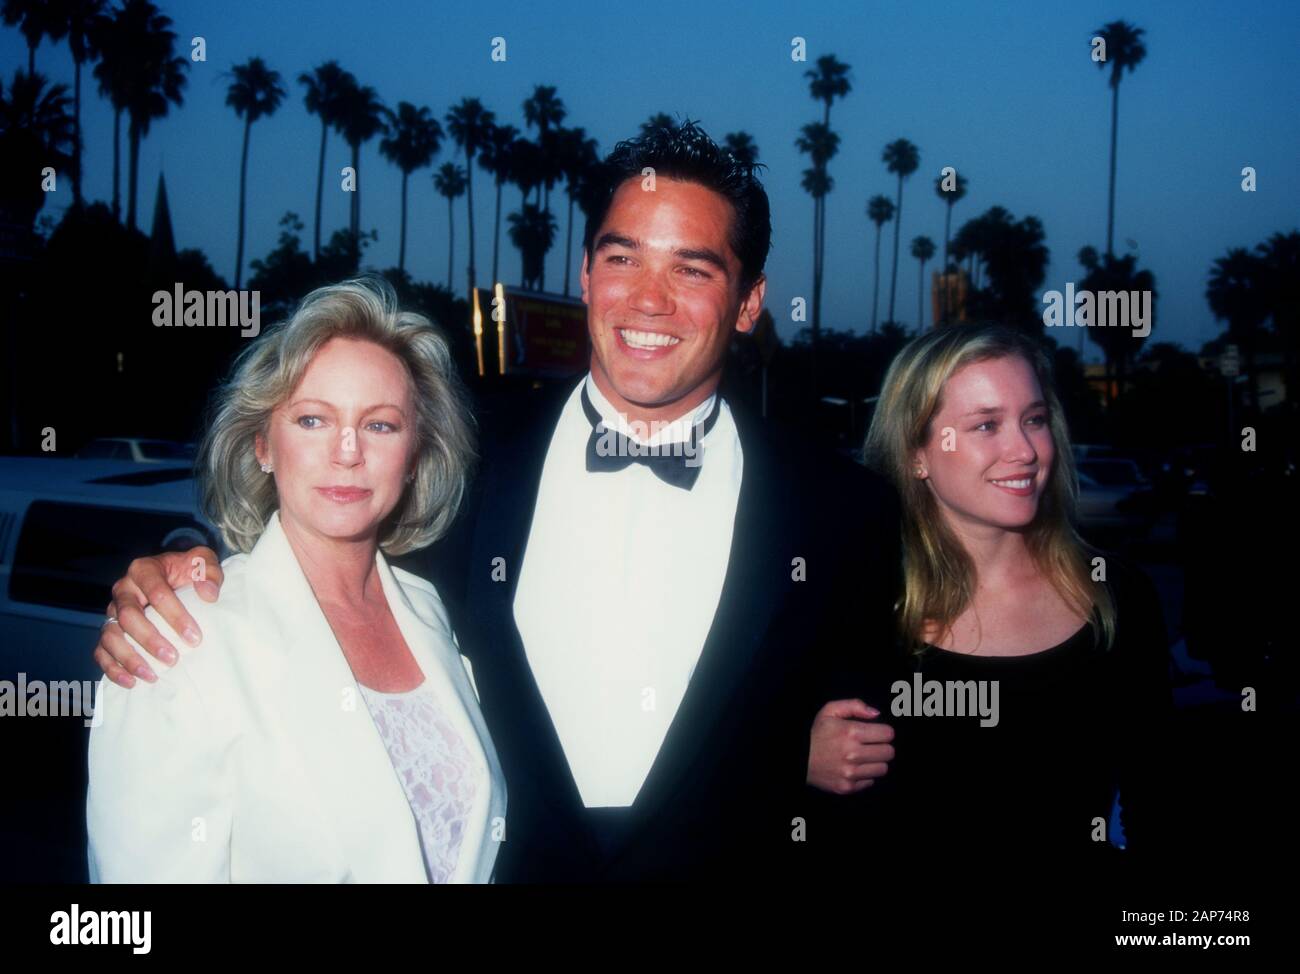 Los Angeles, California, USA 3rd June 1995 Actor Dean Cain attends the First Annual Blockbuster Entertainment Awards on June 3, 1995 at the Pantages Theatre in Los Angeles, California, USA. Photo by Barry King/Alamy Stock Photo Stock Photo